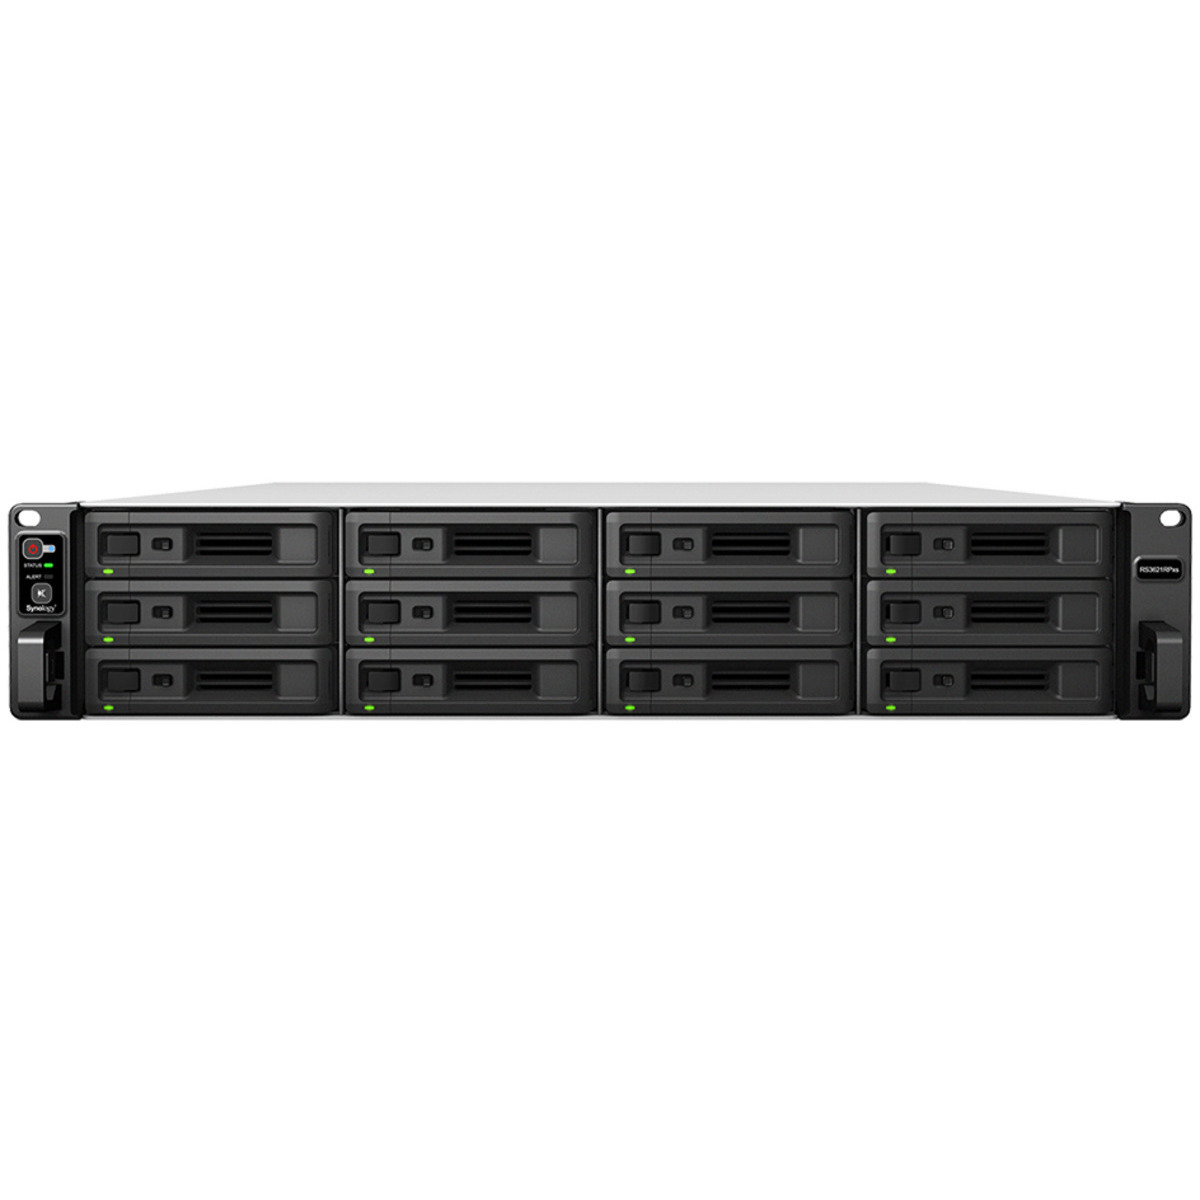 Synology RackStation RS3621RPxs 48tb 12-Bay RackMount Large Business / Enterprise NAS - Network Attached Storage Device 12x4tb Seagate EXOS 7E10 ST4000NM024B 3.5 7200rpm SATA 6Gb/s HDD ENTERPRISE Class Drives Installed - Burn-In Tested RackStation RS3621RPxs